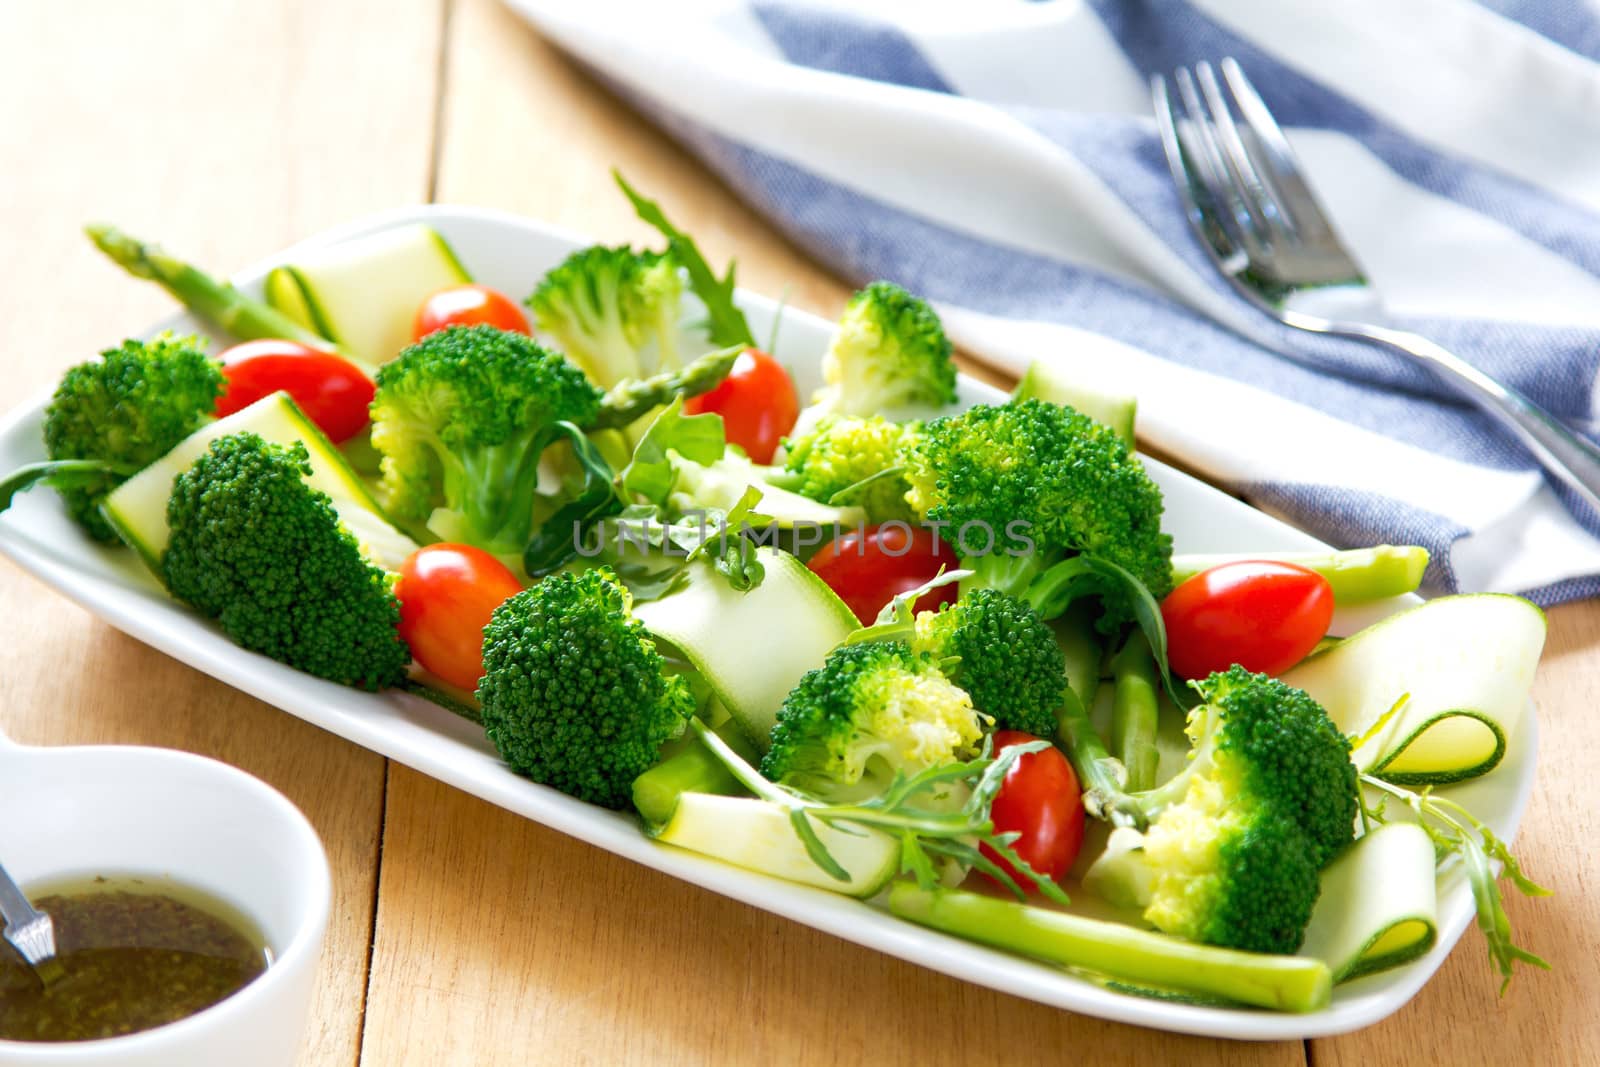 Broccoli with Asparagus and Zucchini salad by vanillaechoes